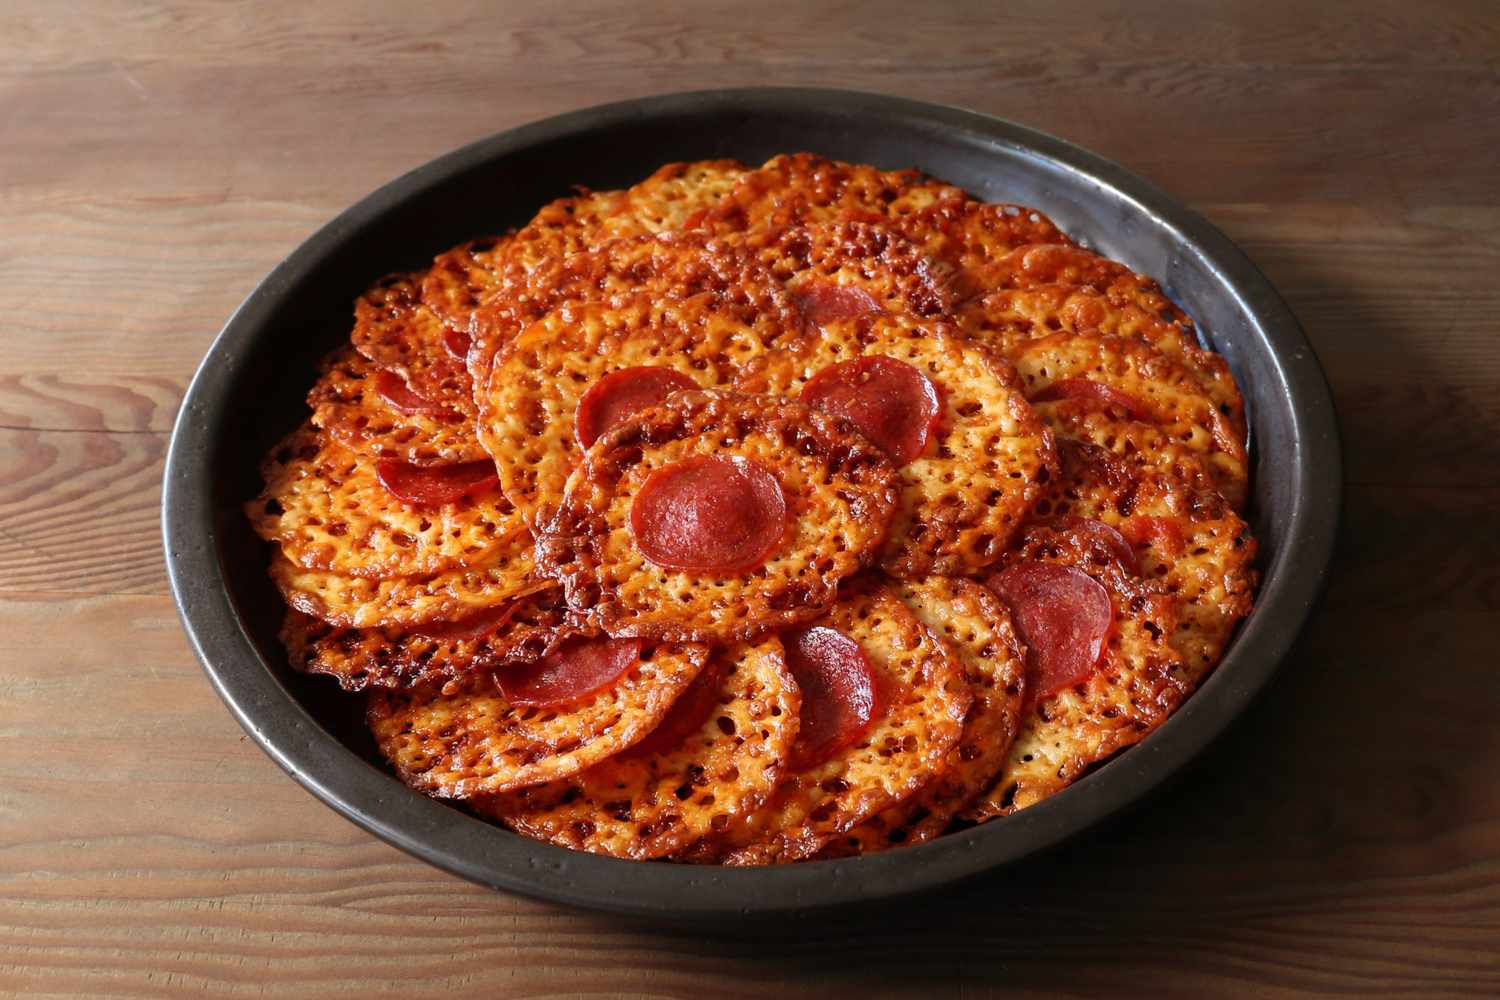 Pepperoni-topped melted cheese crisps stacked in a round black bowl